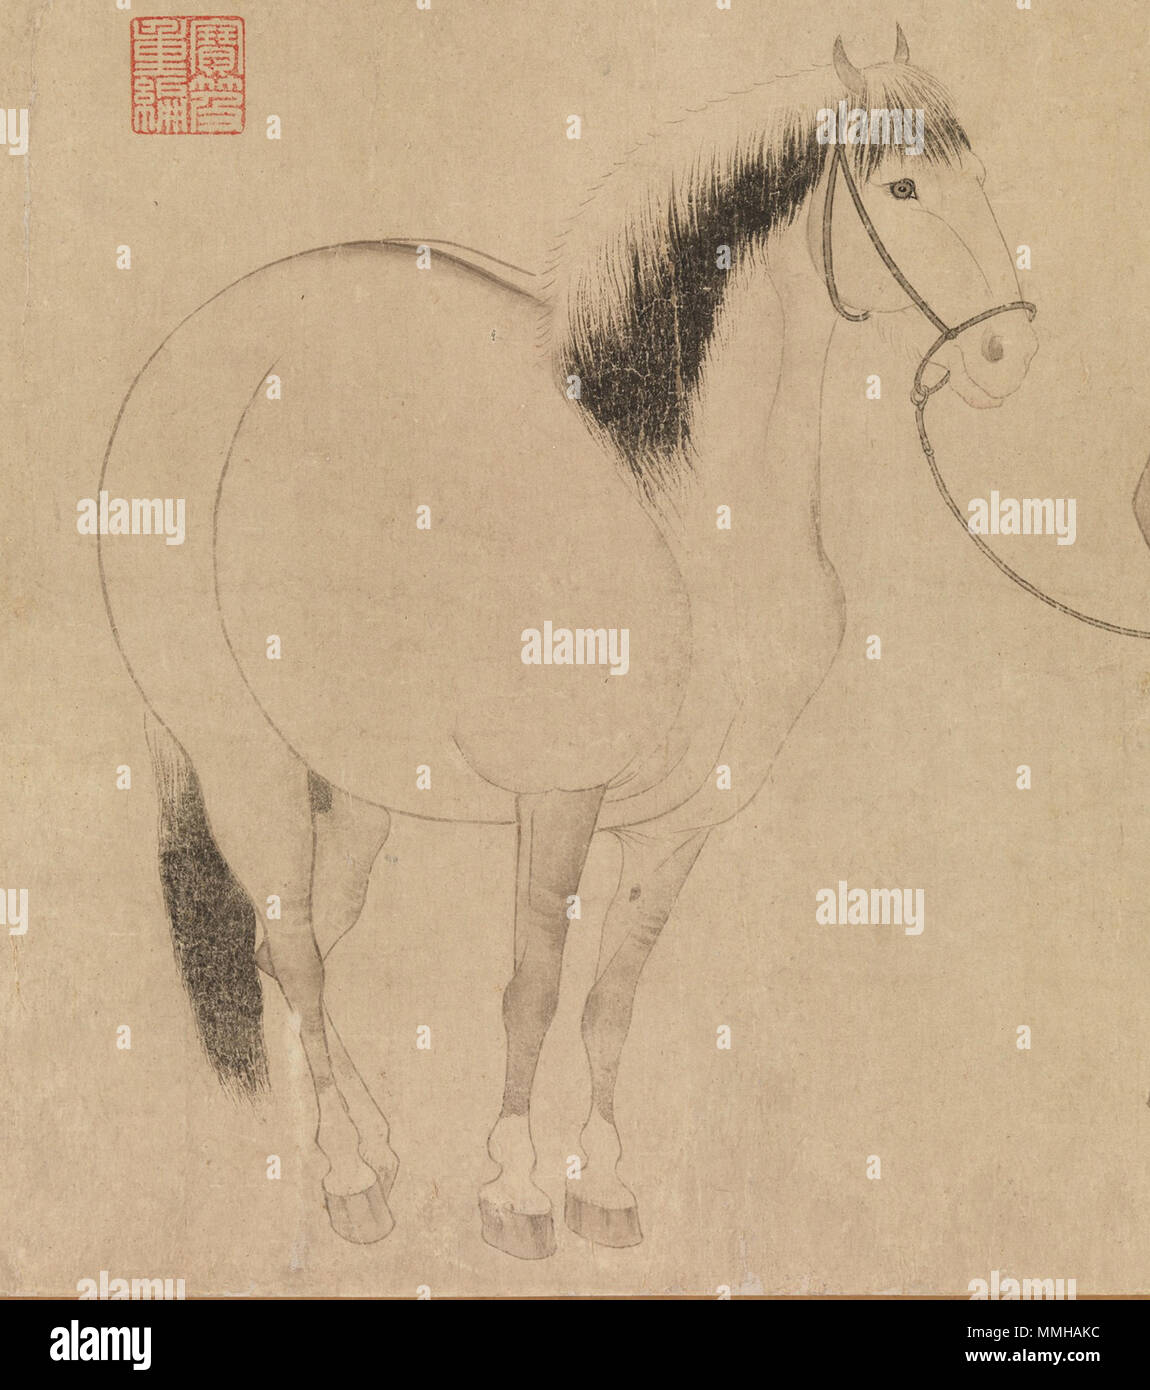 . English: Zhao Mengfu Man and Horse, dated 1296 (30.2 x 178.1 cm), detail; Metropolitan Mus. N-Y  . 14 January 2008.   Zhao Mengfu  (1254–1322)       Alternative names ????; ???; ???; ???  Description Chinese painter  Date of birth/death 1254 1322  Location of birth/death Wuxingchang Beijing  Authority control  : Q197461 VIAF:?50532127 ISNI:?0000 0000 8050 1999 ULAN:?500121418 LCCN:?n80125431 NLA:?36730921 WorldCat 7b Zhao Mengfu Man and Horse, dated 1296 (30.2 x 178.1 cm); Metropolitan Mus. N-Y Stock Photo